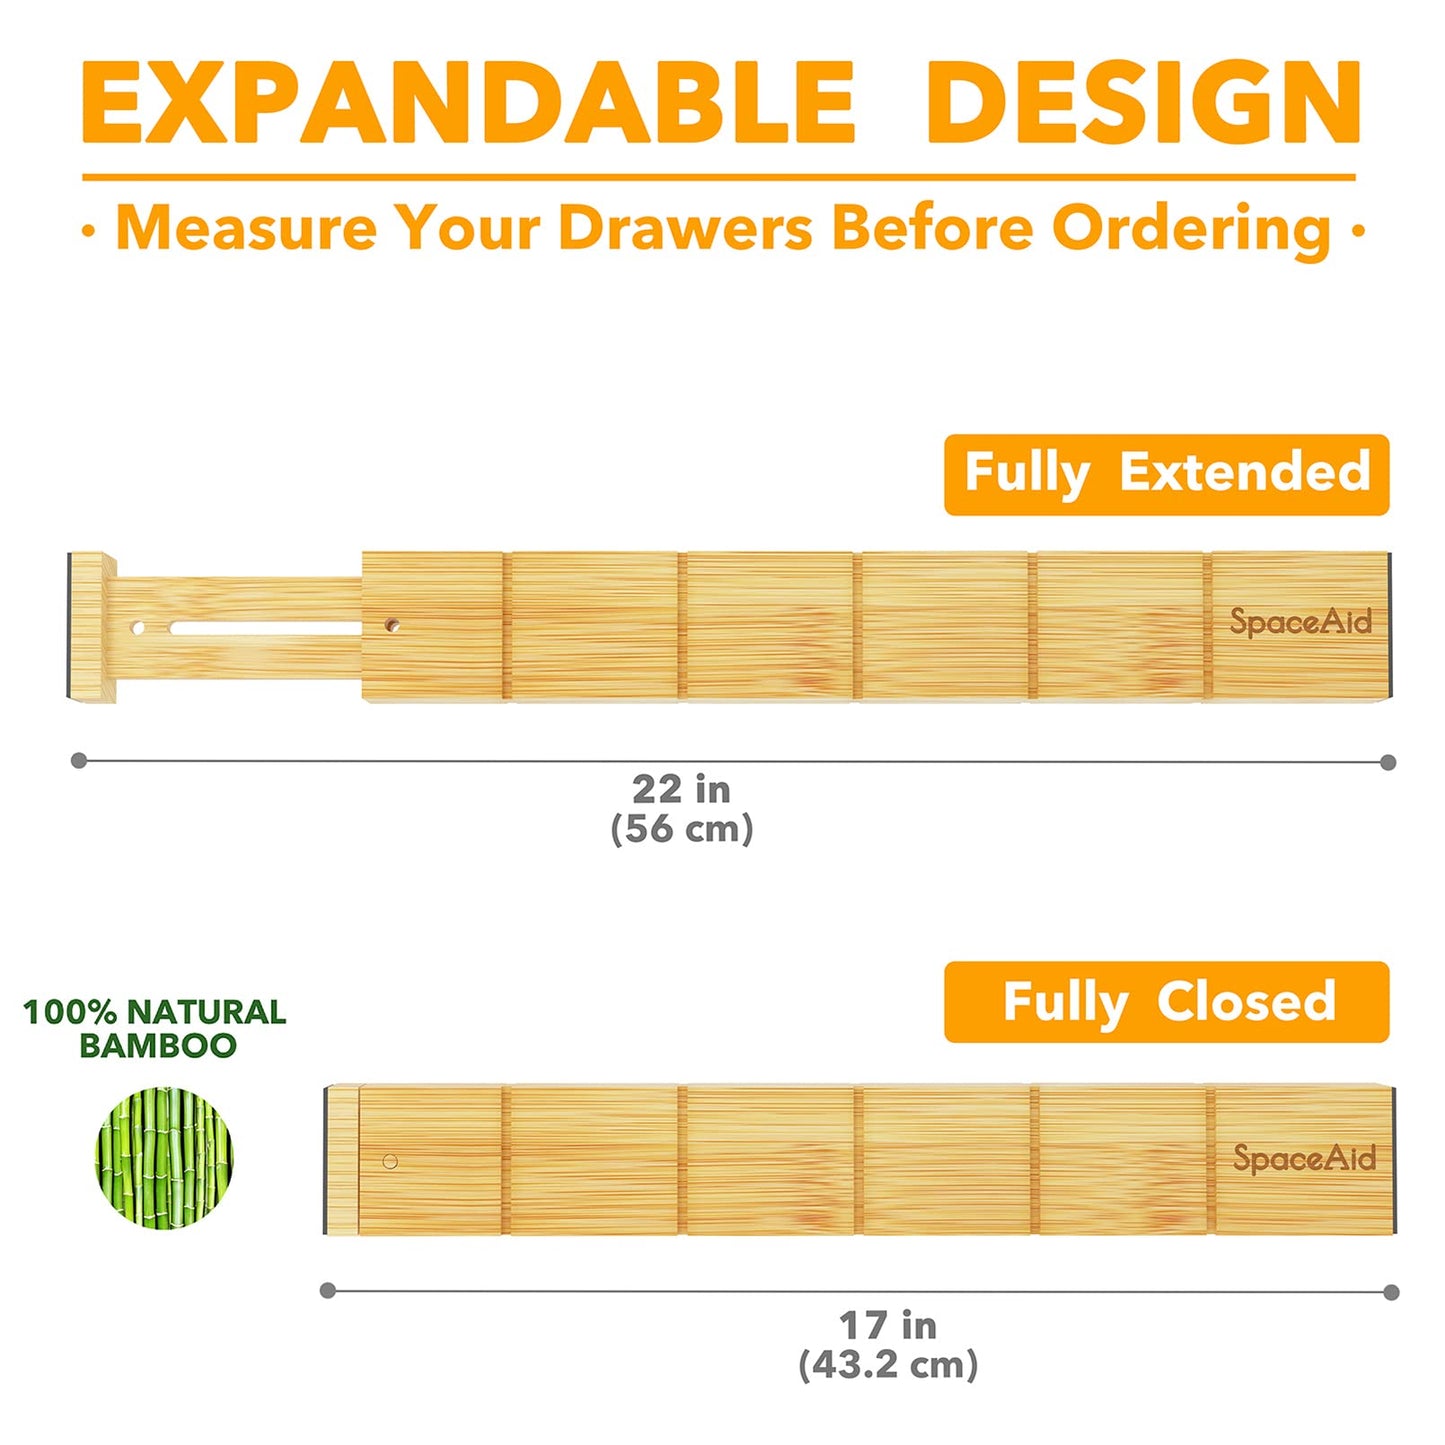 SpaceAid Bamboo Drawer Dividers with Inserts and Labels, Kitchen Adjustable Drawer Organizers, Expandable Organization for Home, Office, Dressers, 4 Dividers with 9 Inserts (17-22 in)